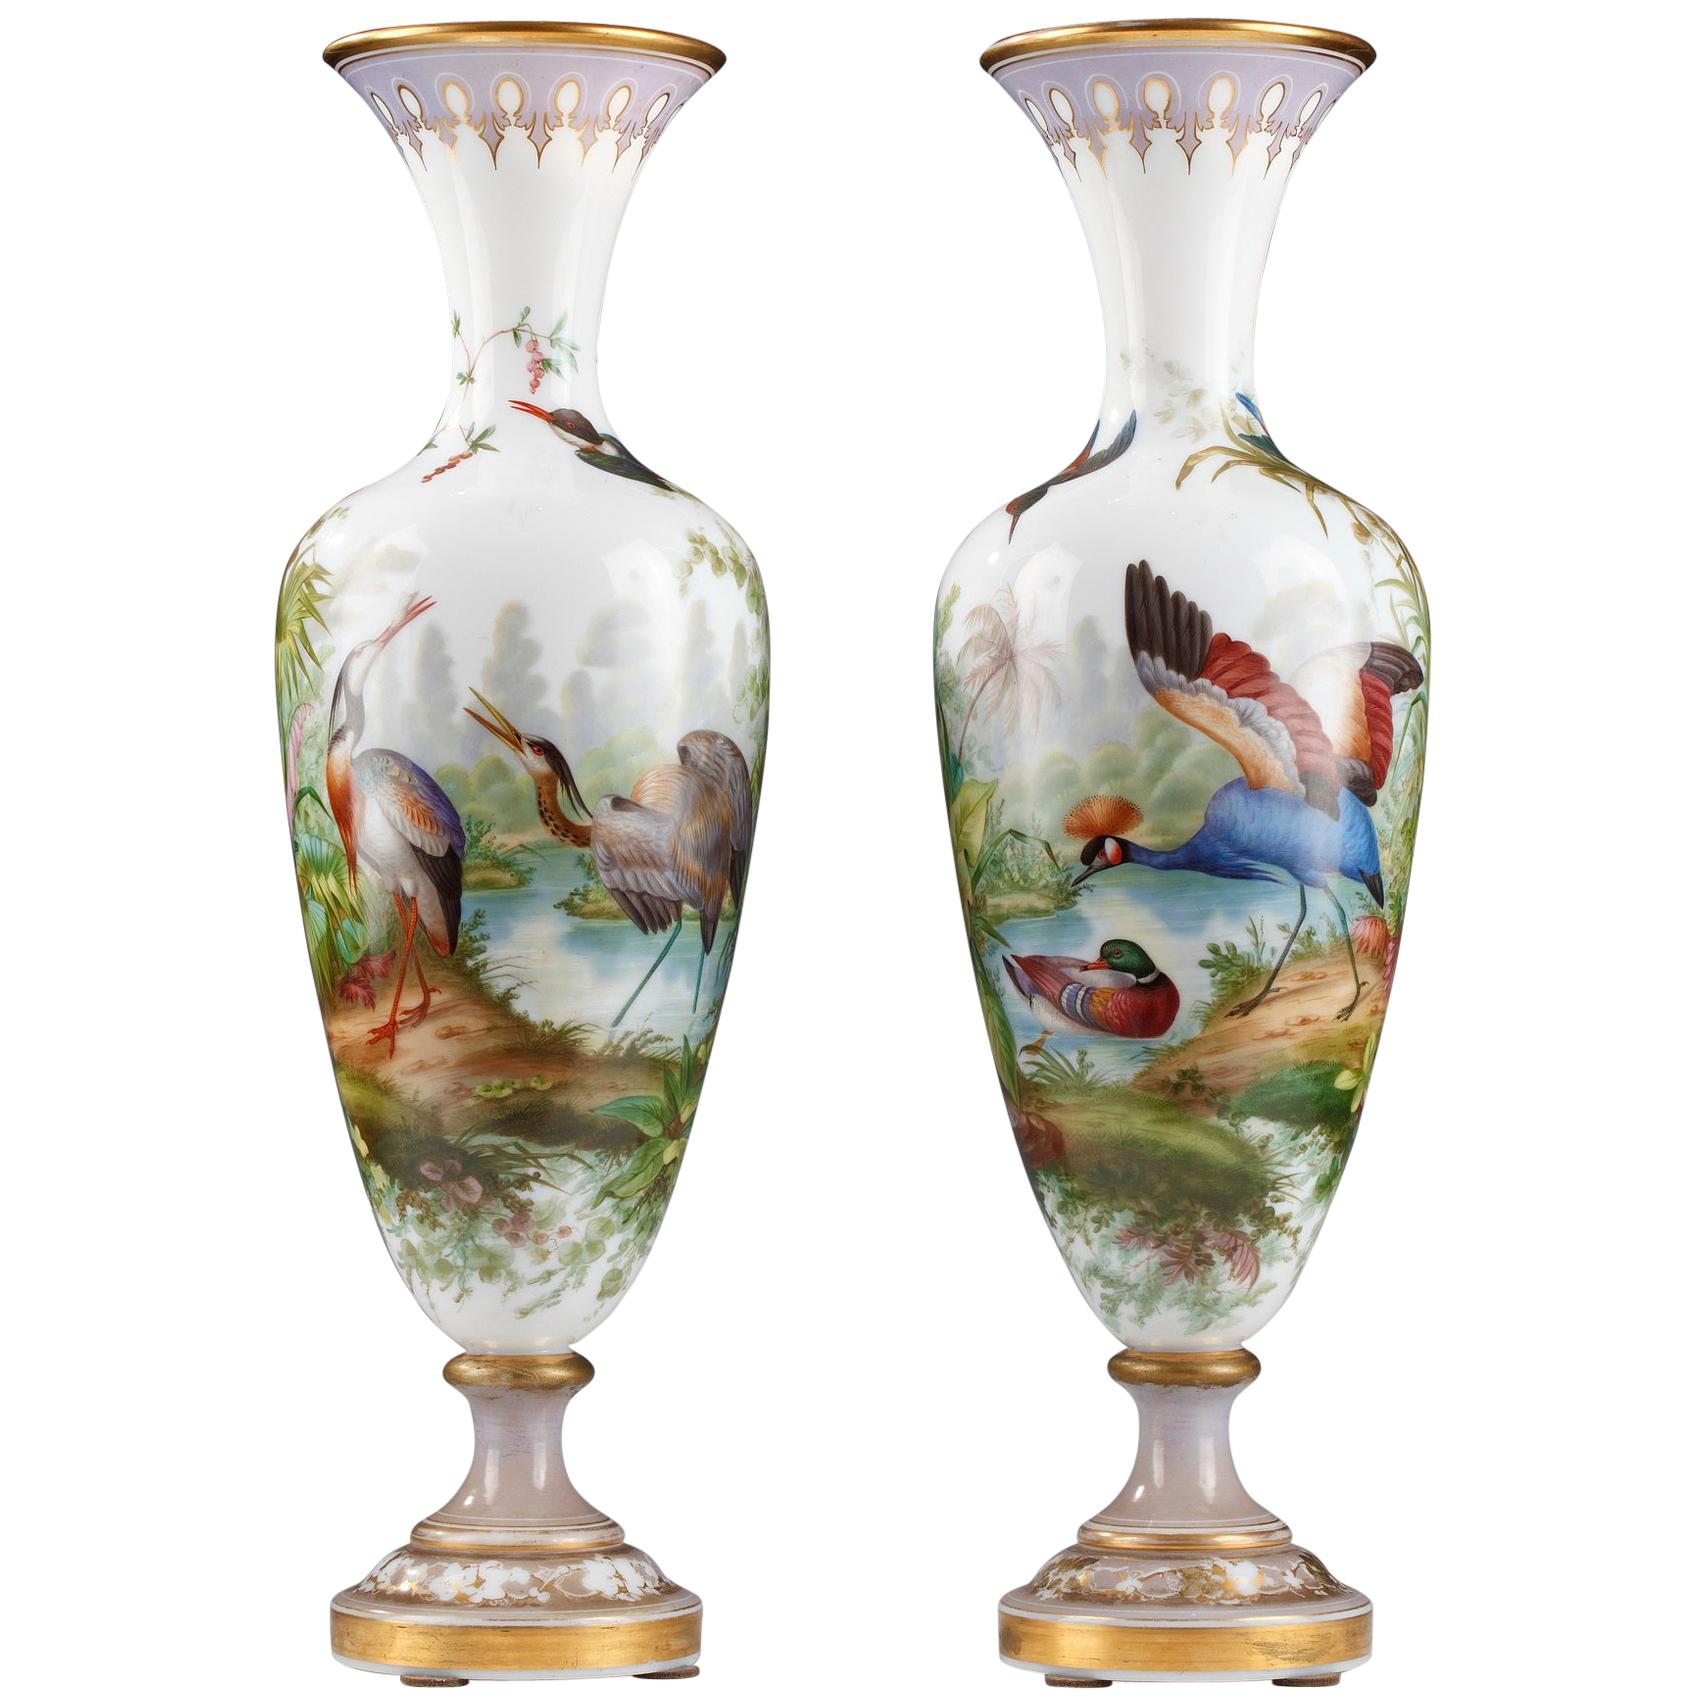 Beautiful Pair of Opal Glass Vases Attributed to Baccarat, France, Circa 1860